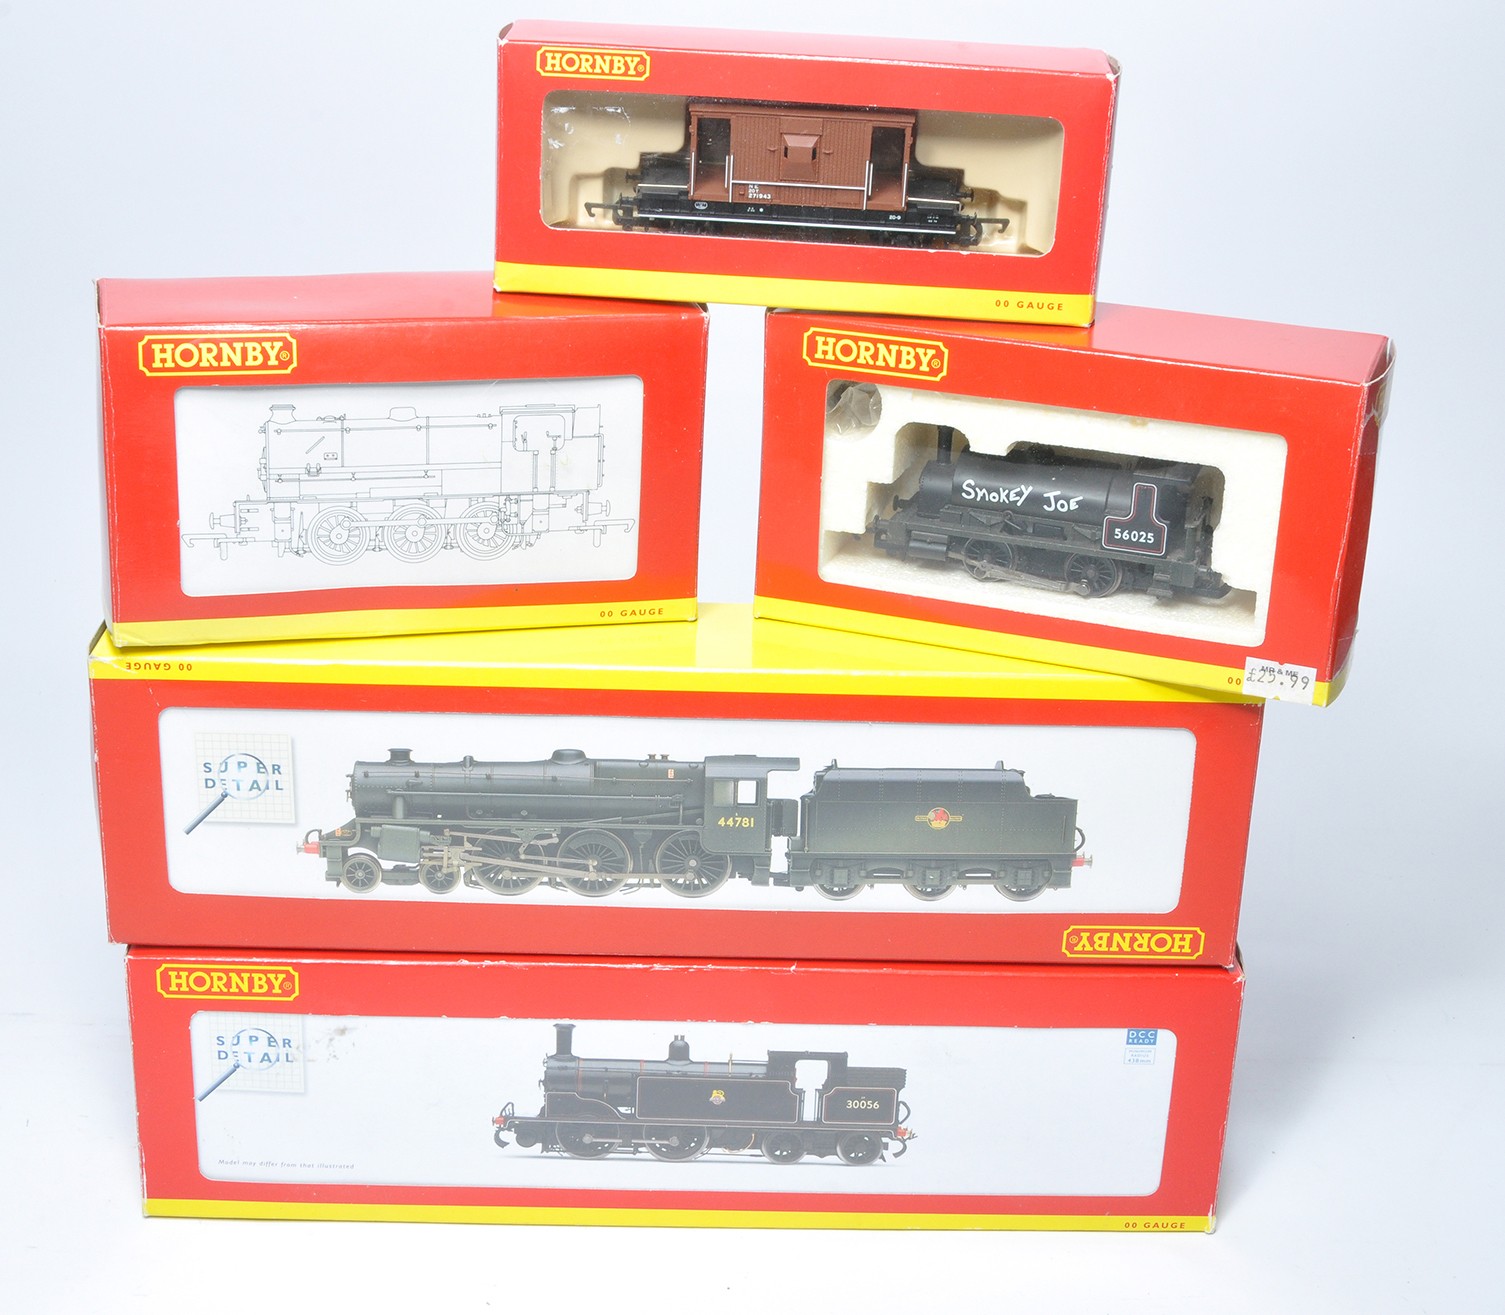 Model Railway comprising Boxed Hornby Locomotives as shown, plus one item of rolling stock. Untested